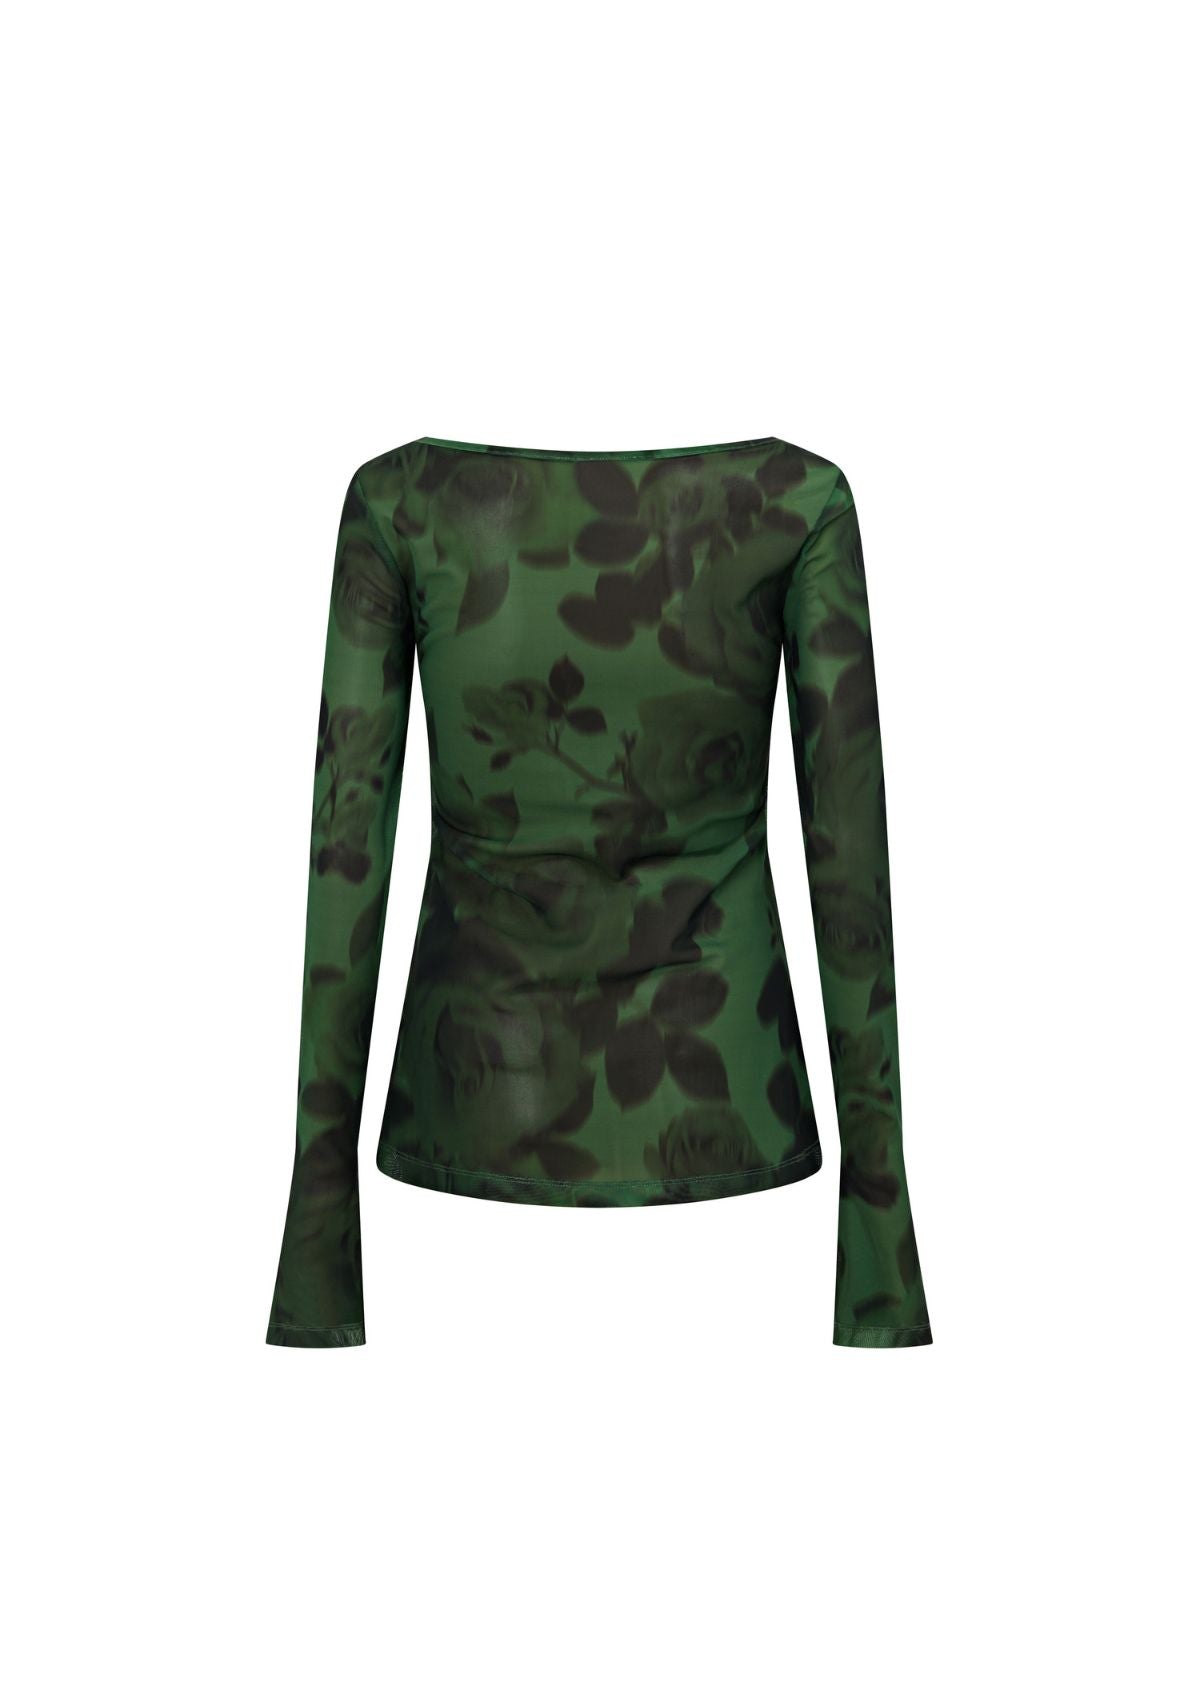 Thorne Long Sleeve Top Bell Sleeve Mesh Fitted Tie Up Green and Black Floral Top